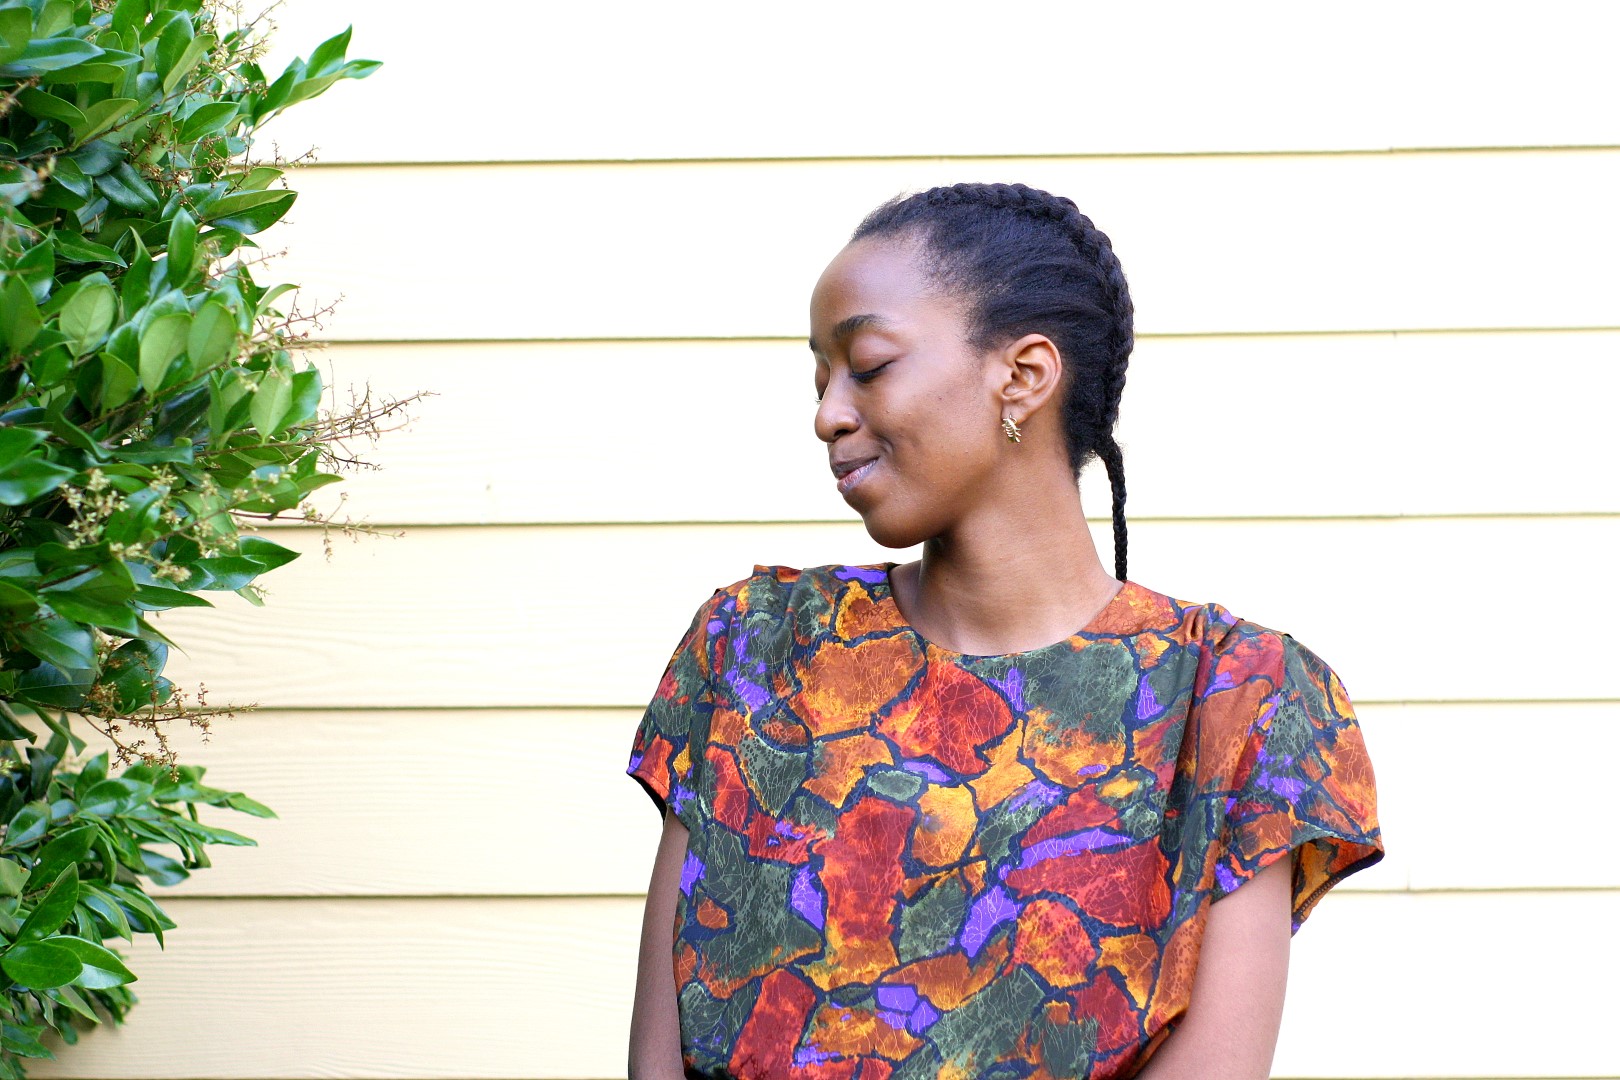 Going back to the basics - Nigerian fashion blogger Cassie Daves in a profile shot wearing a bright coloured prints top